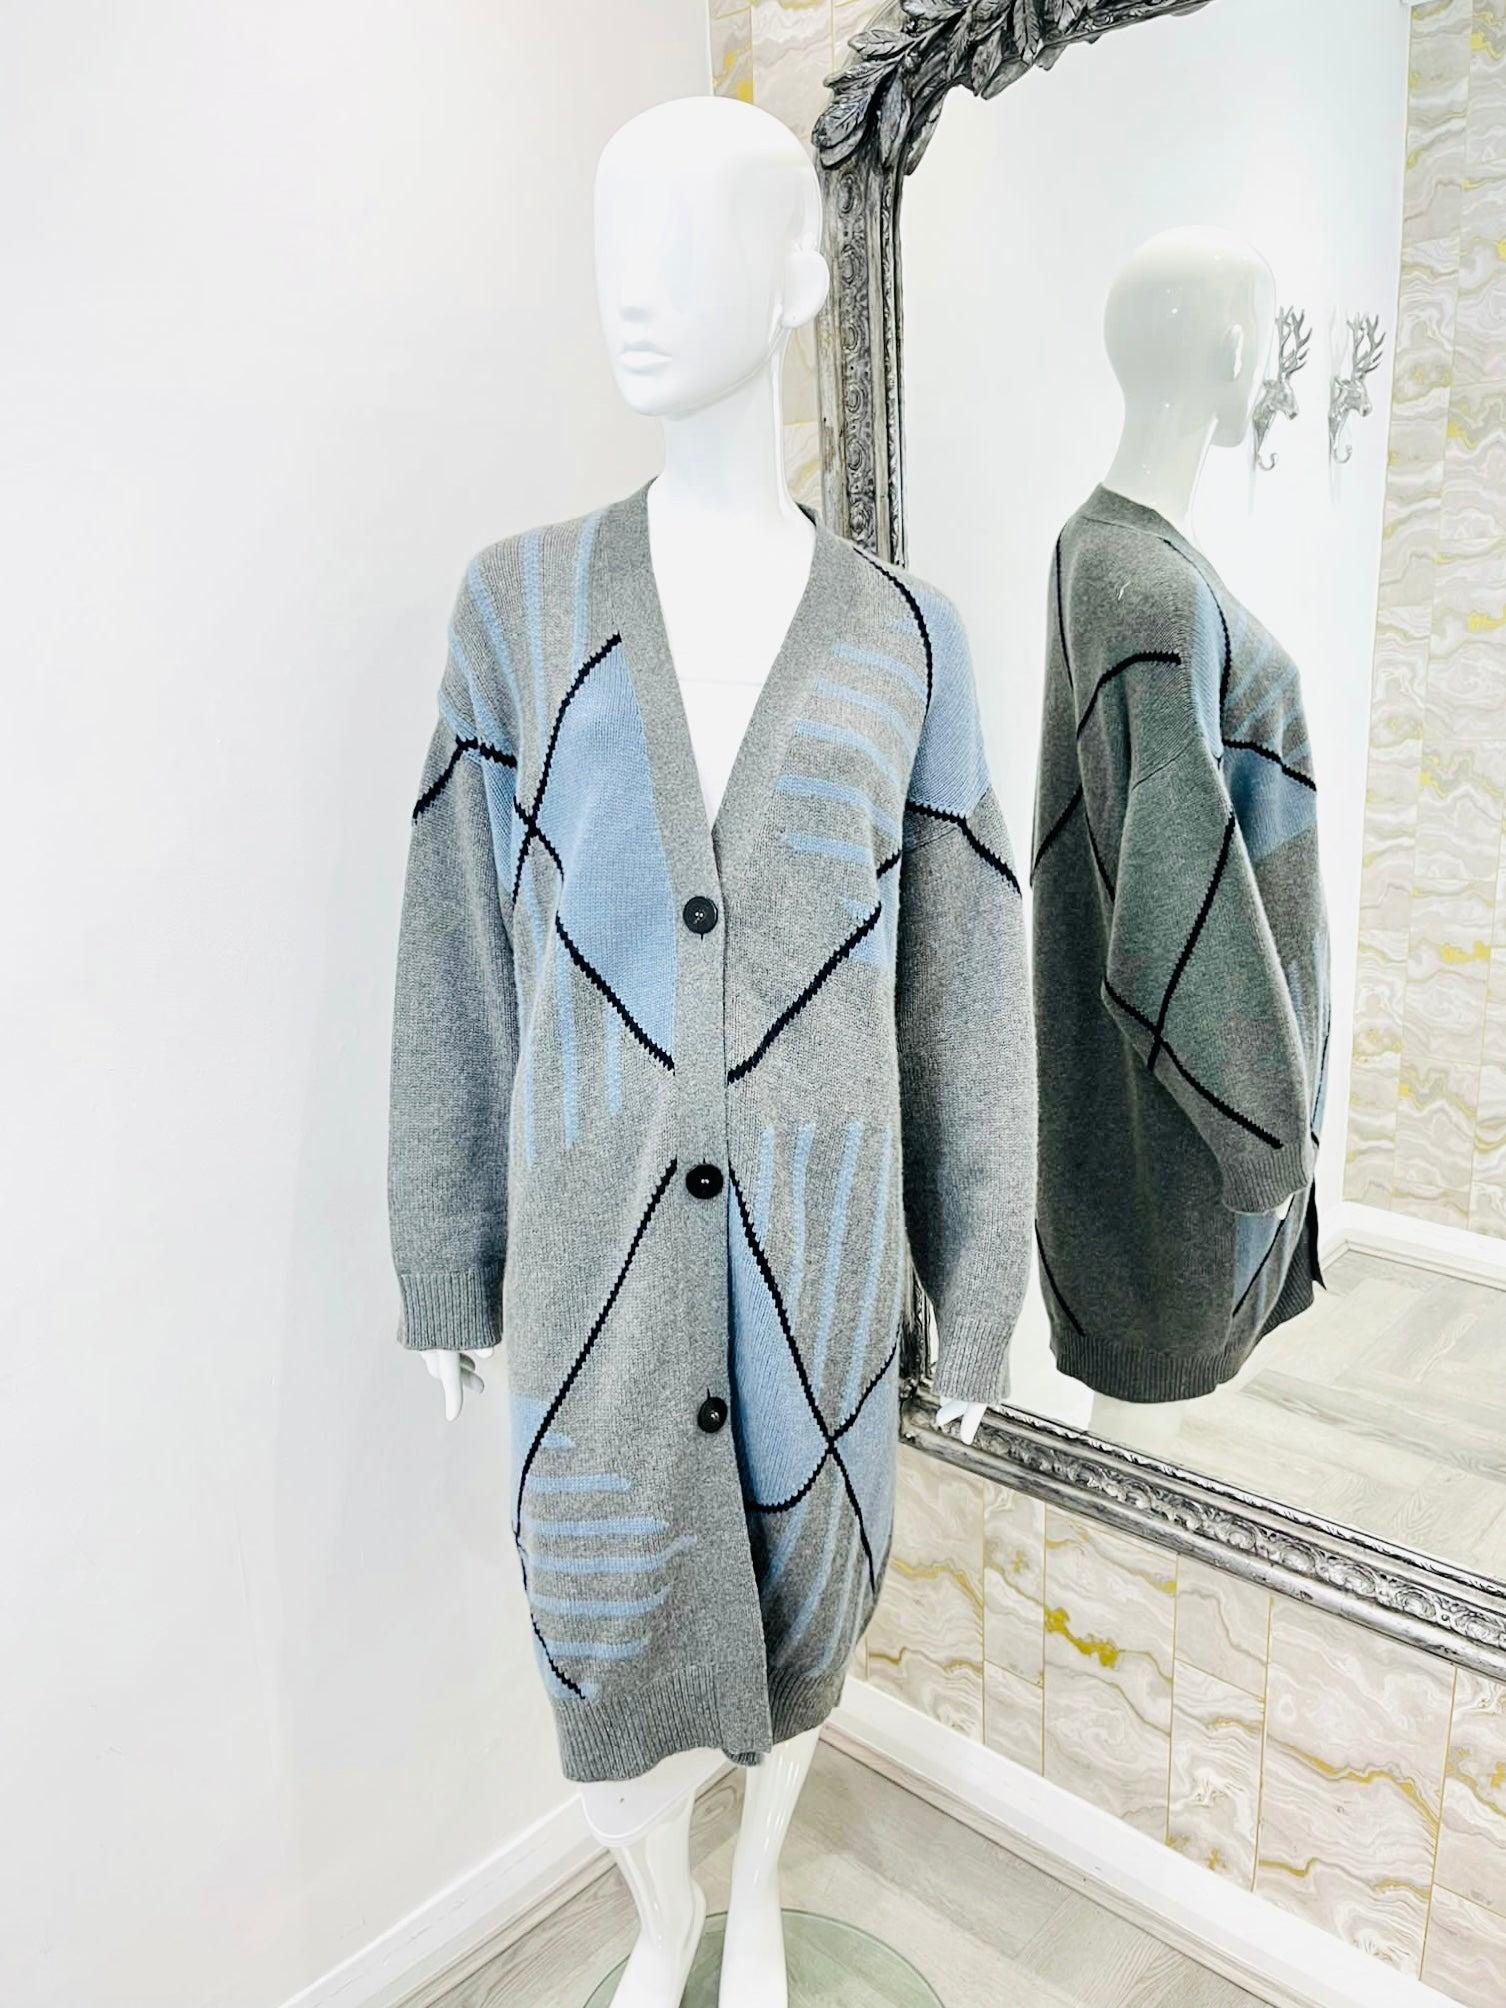 Brand New - Hermes Cashmere Cardi/Coat

Long grey cardigan with blue and black abstract, argyle design.

Logo buttons.

Size - 38FR

Condition - Brand New, With Labels

Composition - Cashmere